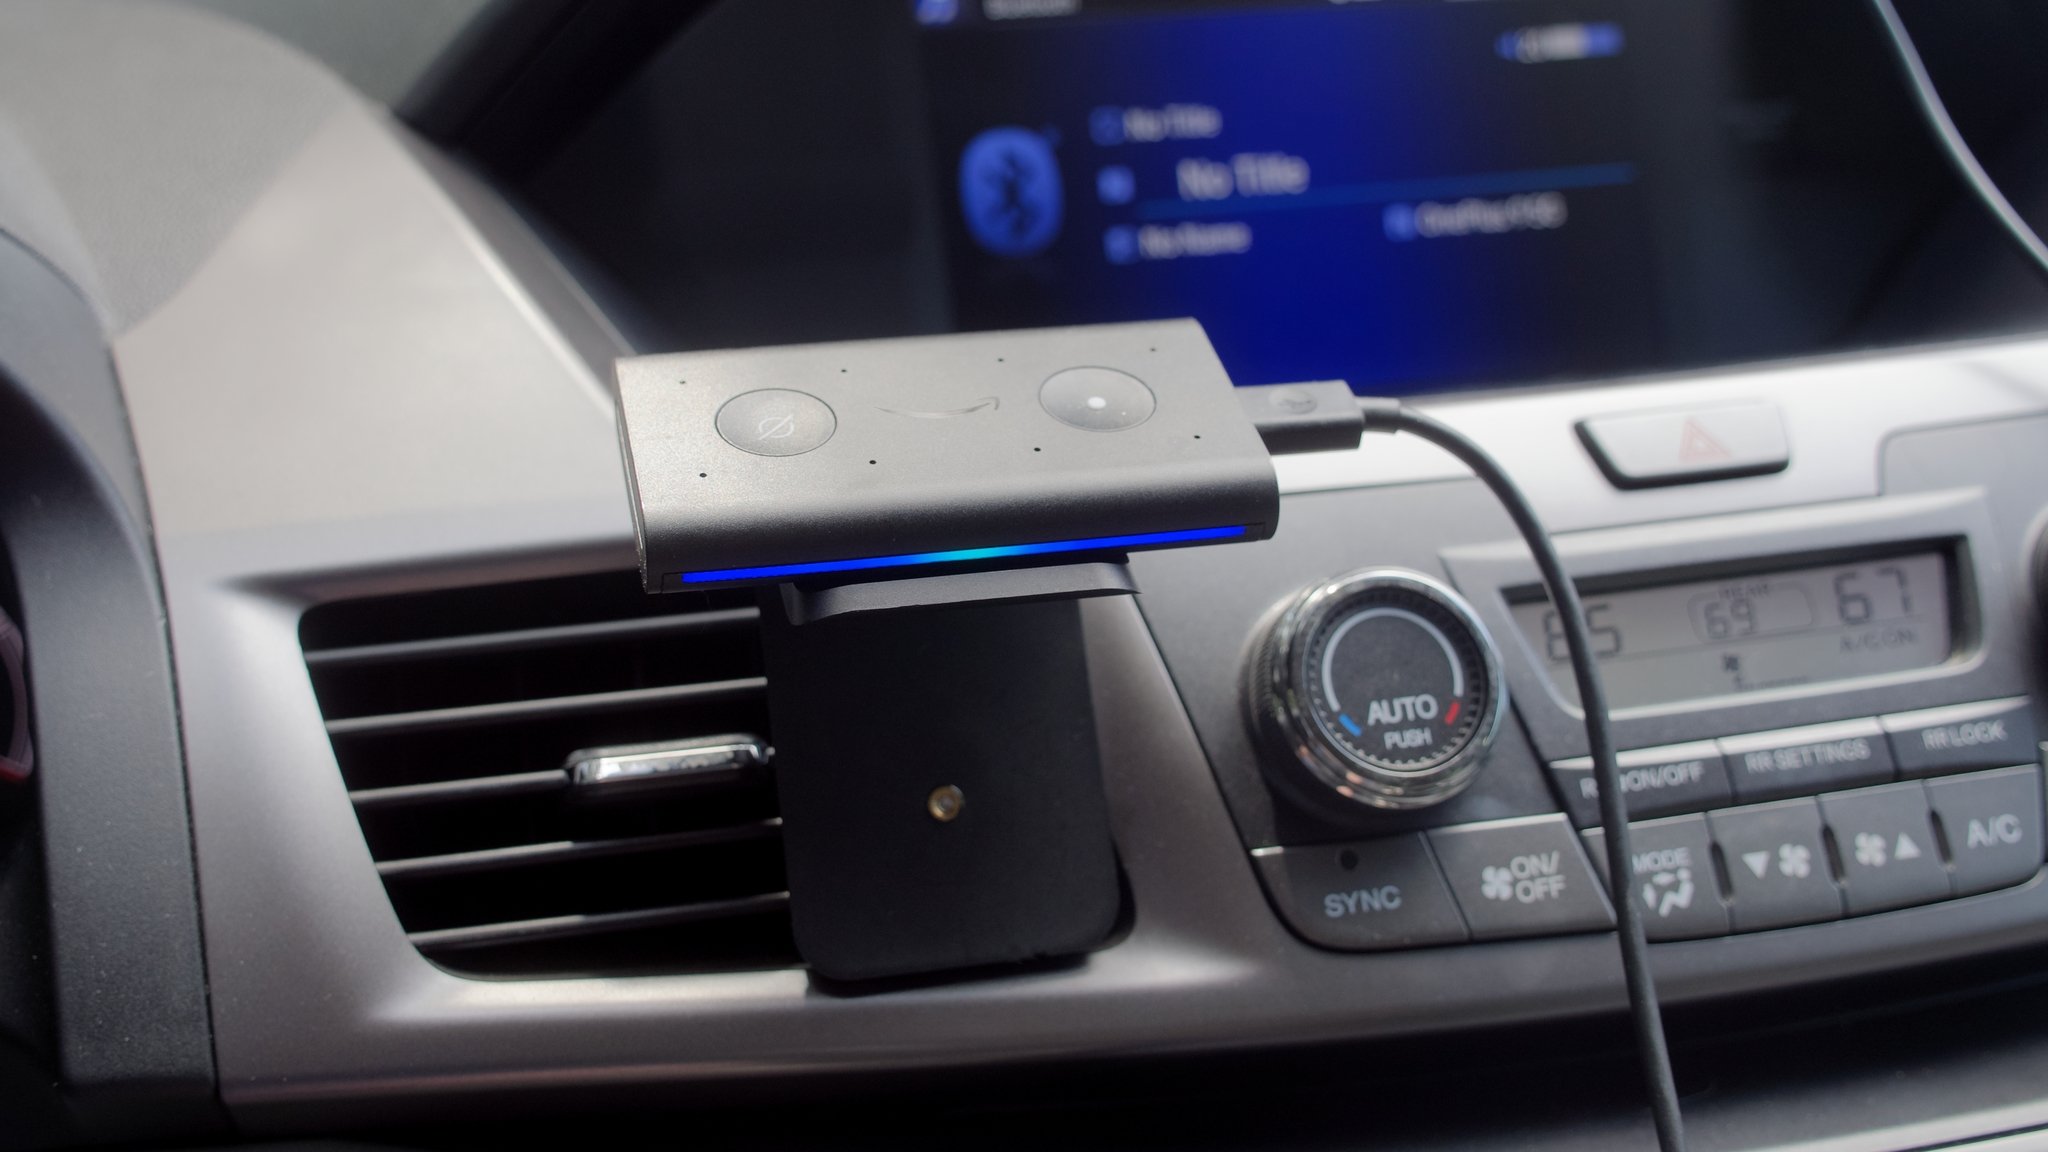 Echo Auto review: Much improved but still miles behind the